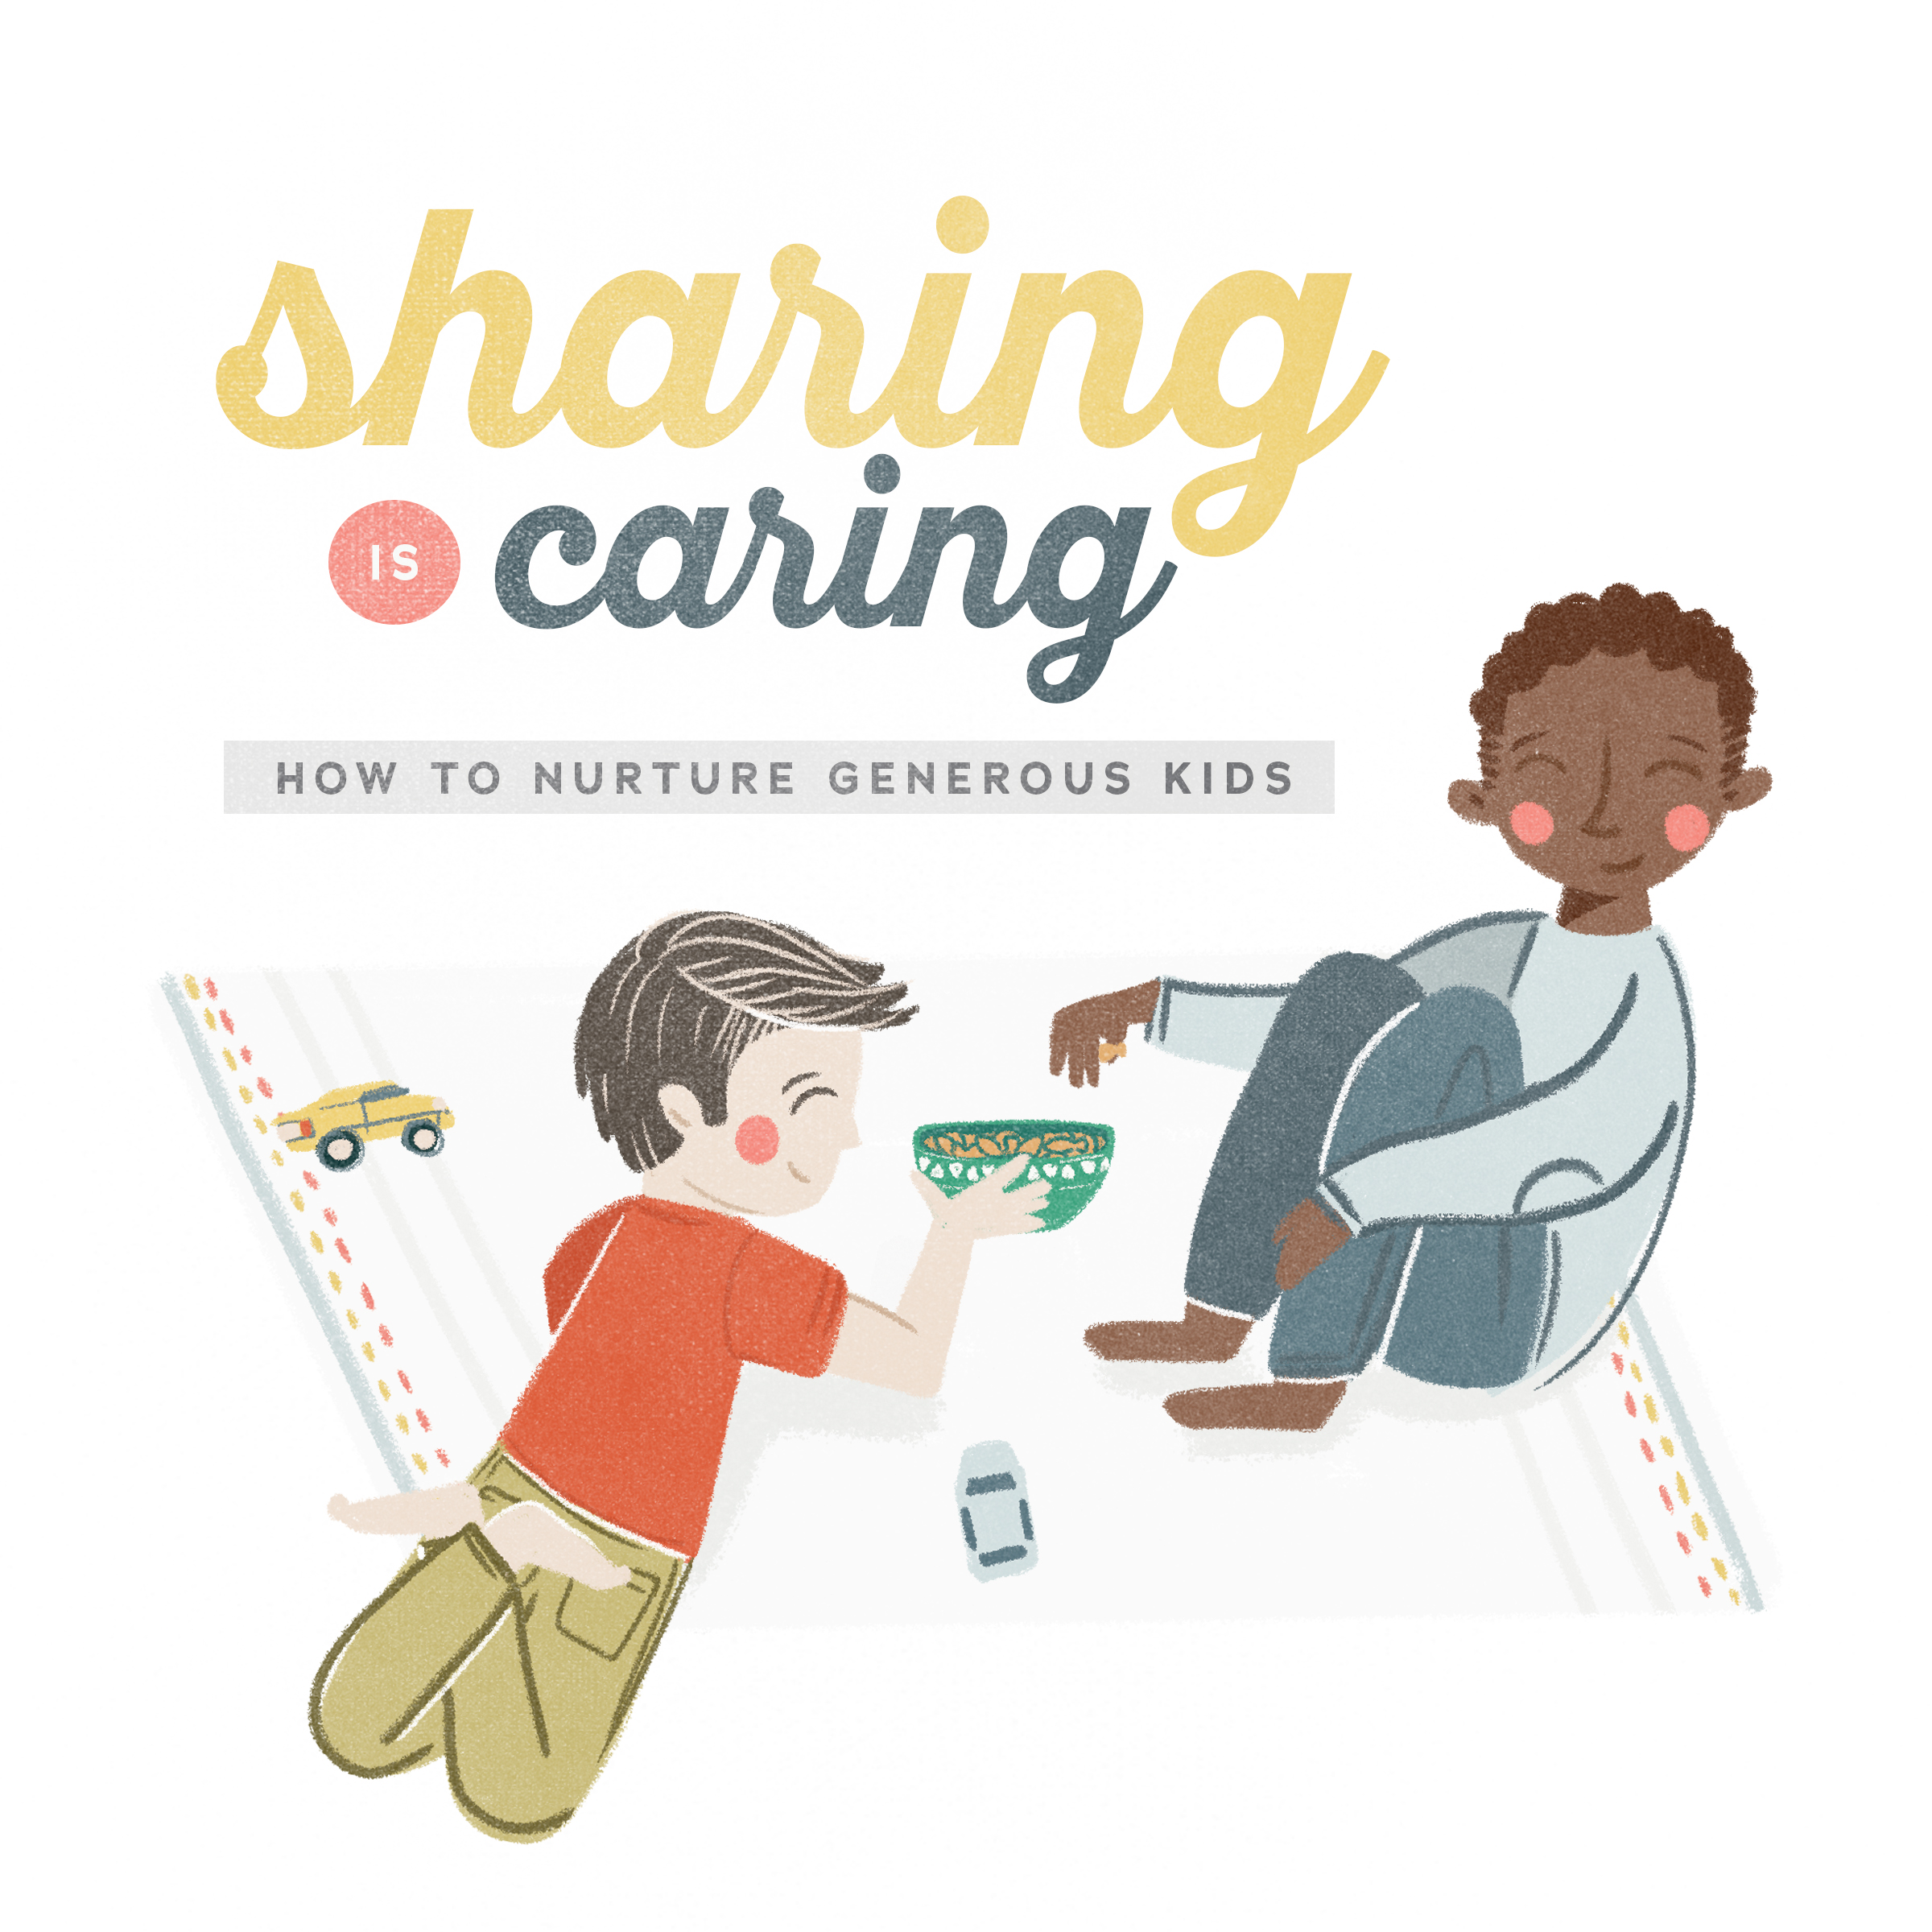 Sharing is Caring: how to nurture generous kids